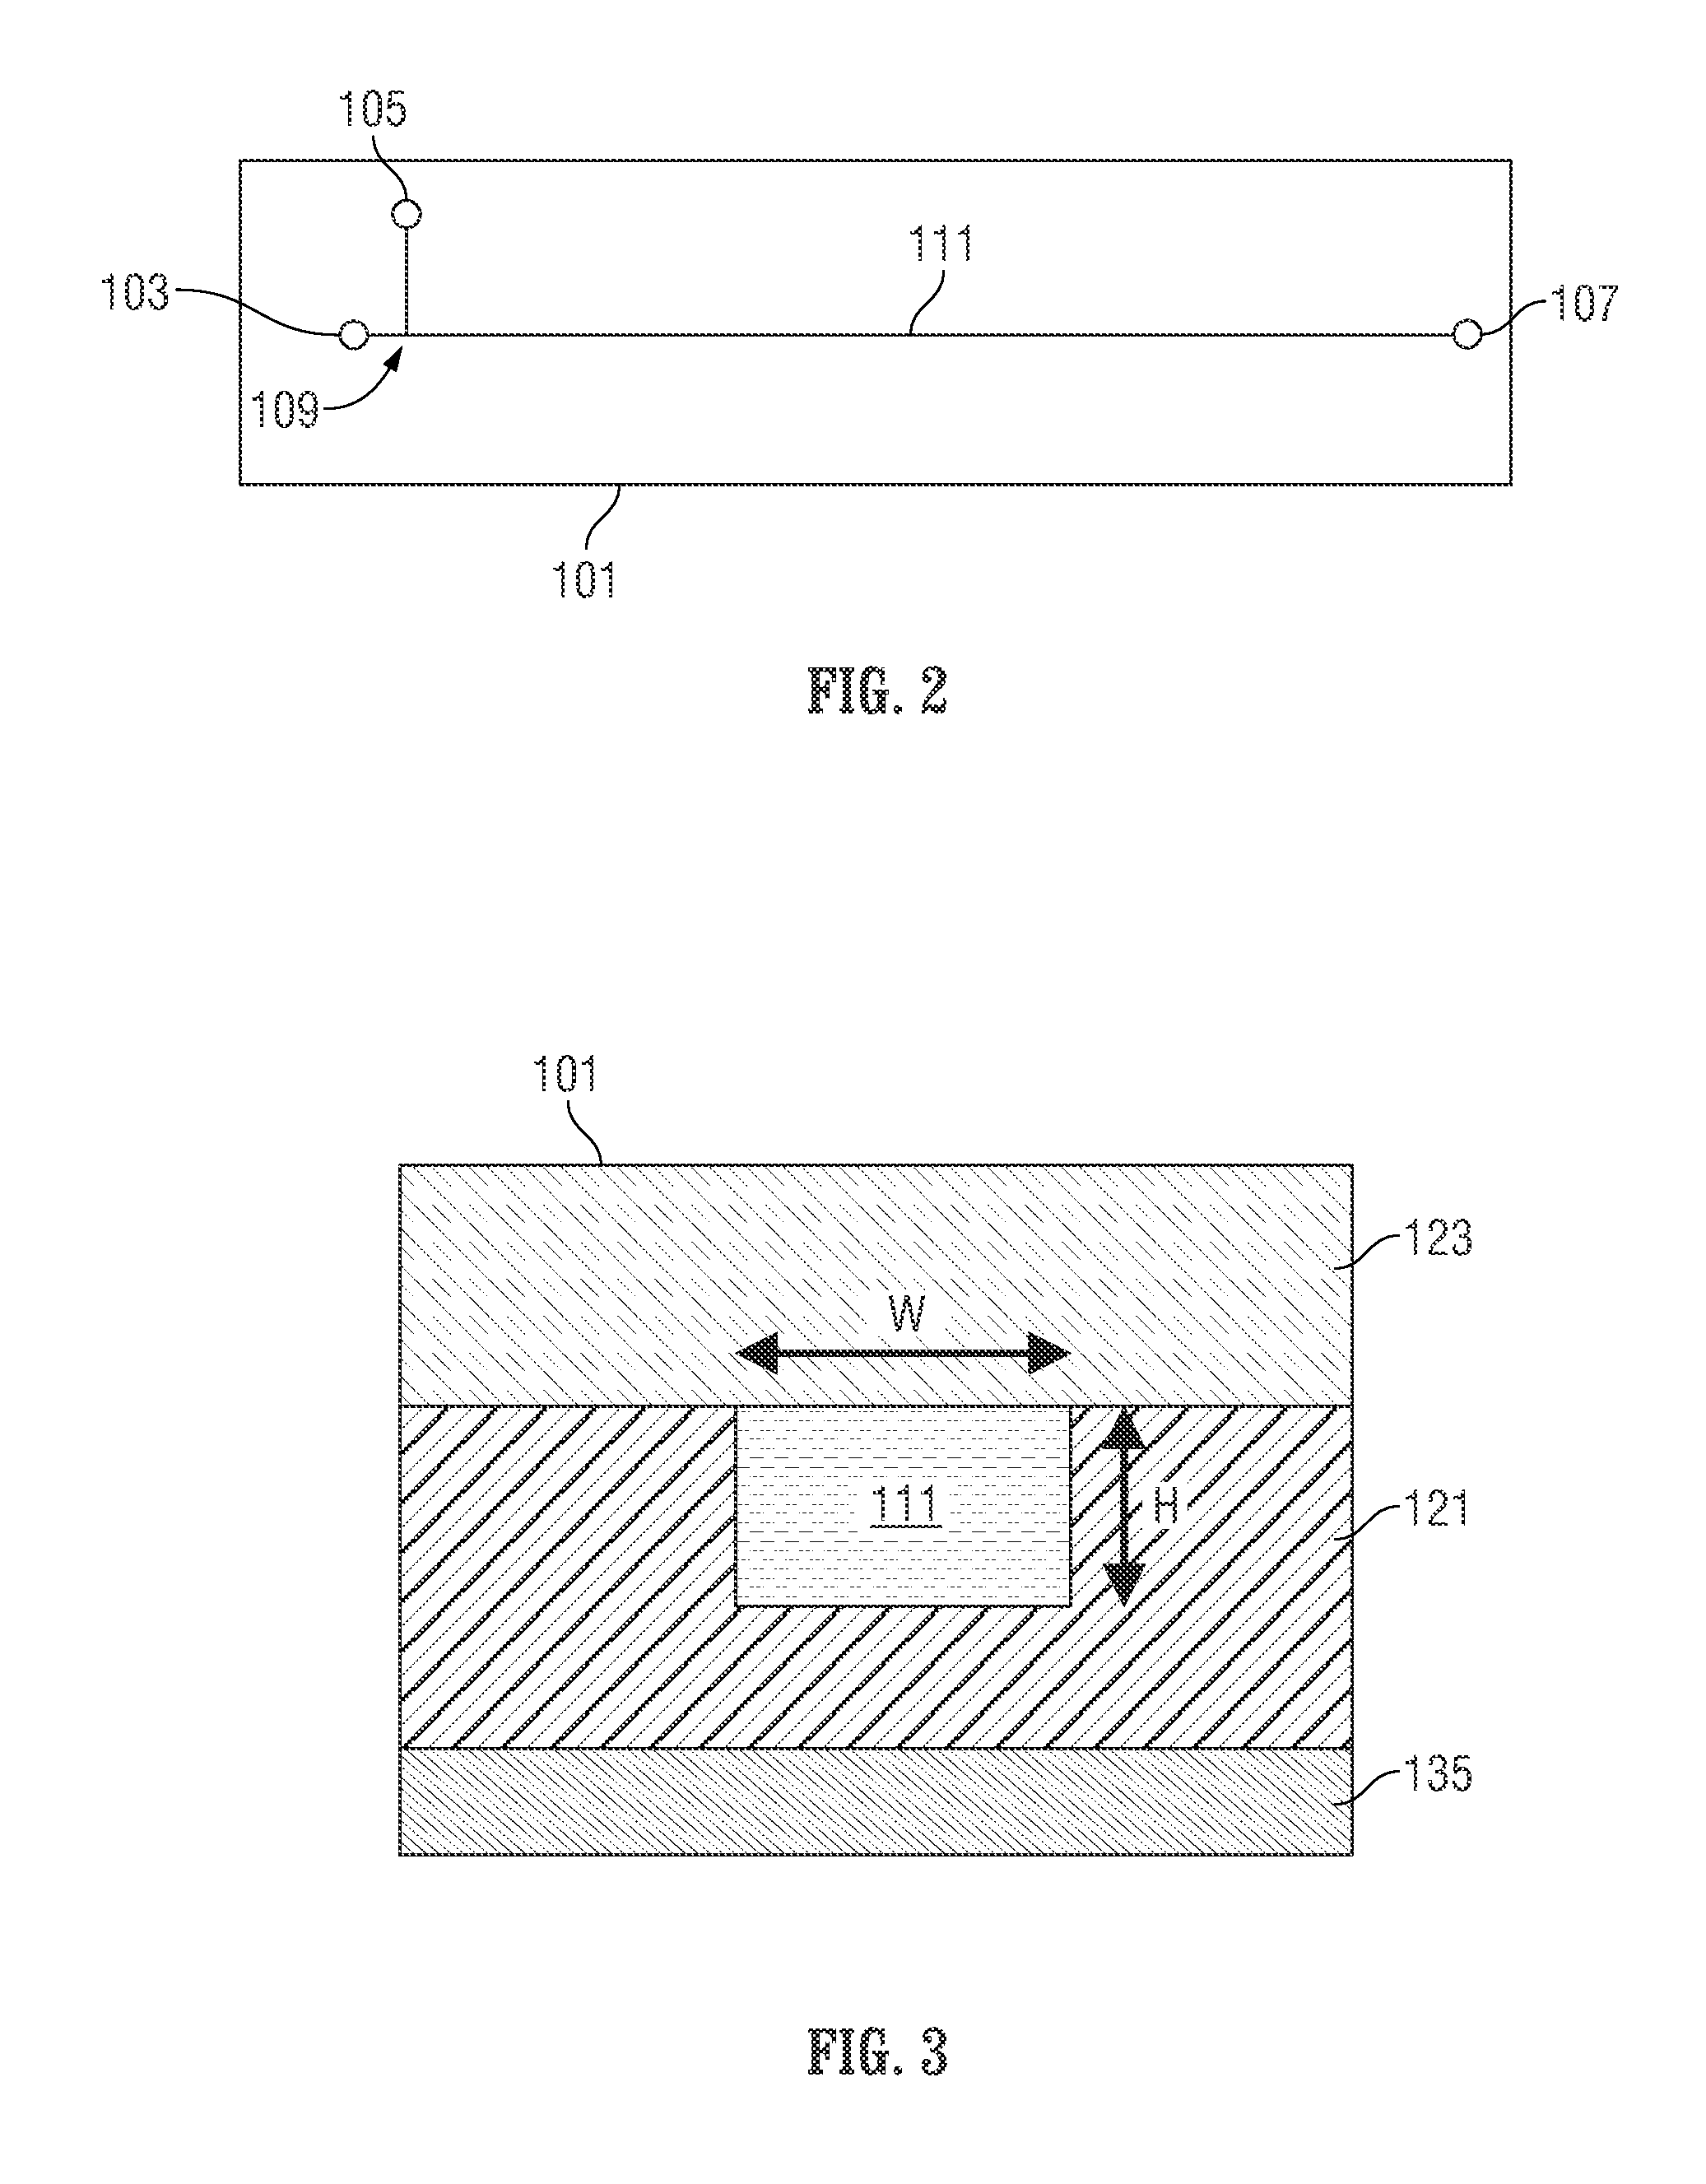 Method and apparatus for characterizing clathrate hydrate formation conditions employing microfluidic device